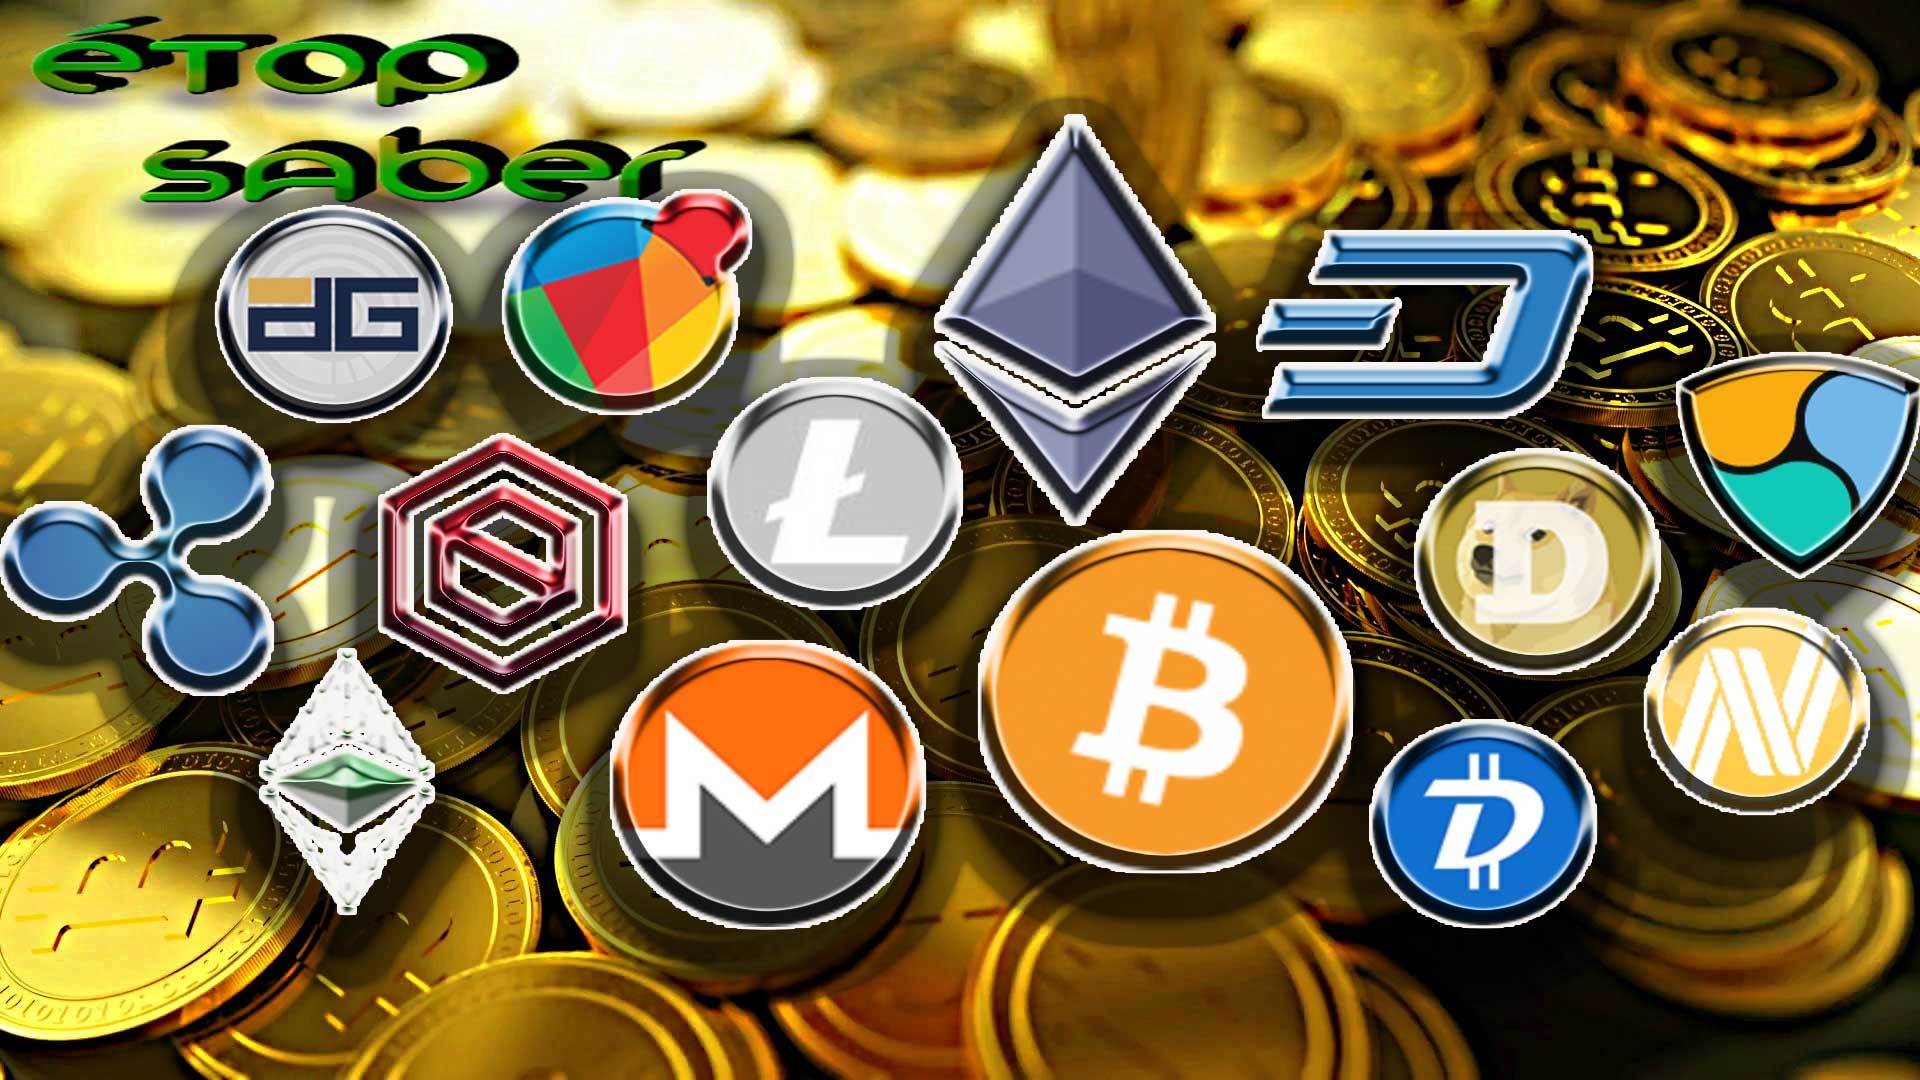 How to Earn Money with Altcoins